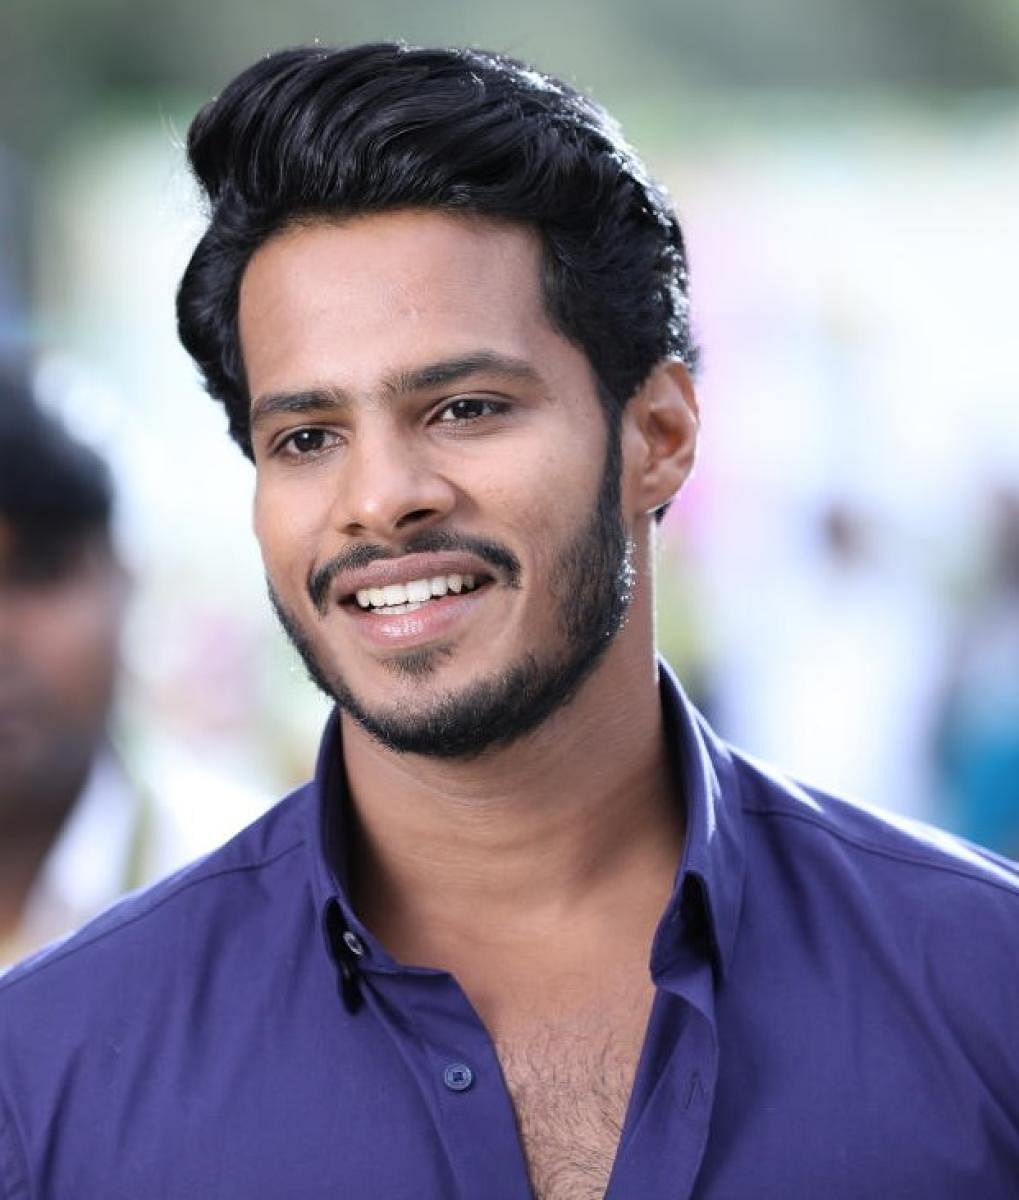 Karnataka Chief Minister H D Kumaraswamy's son Nikhil Kumaraswamy, a popular actor, said Thursday that he was ready to serve the people of Mandya from where he is expected to contest the coming Lok Sabha elections. DH file photo